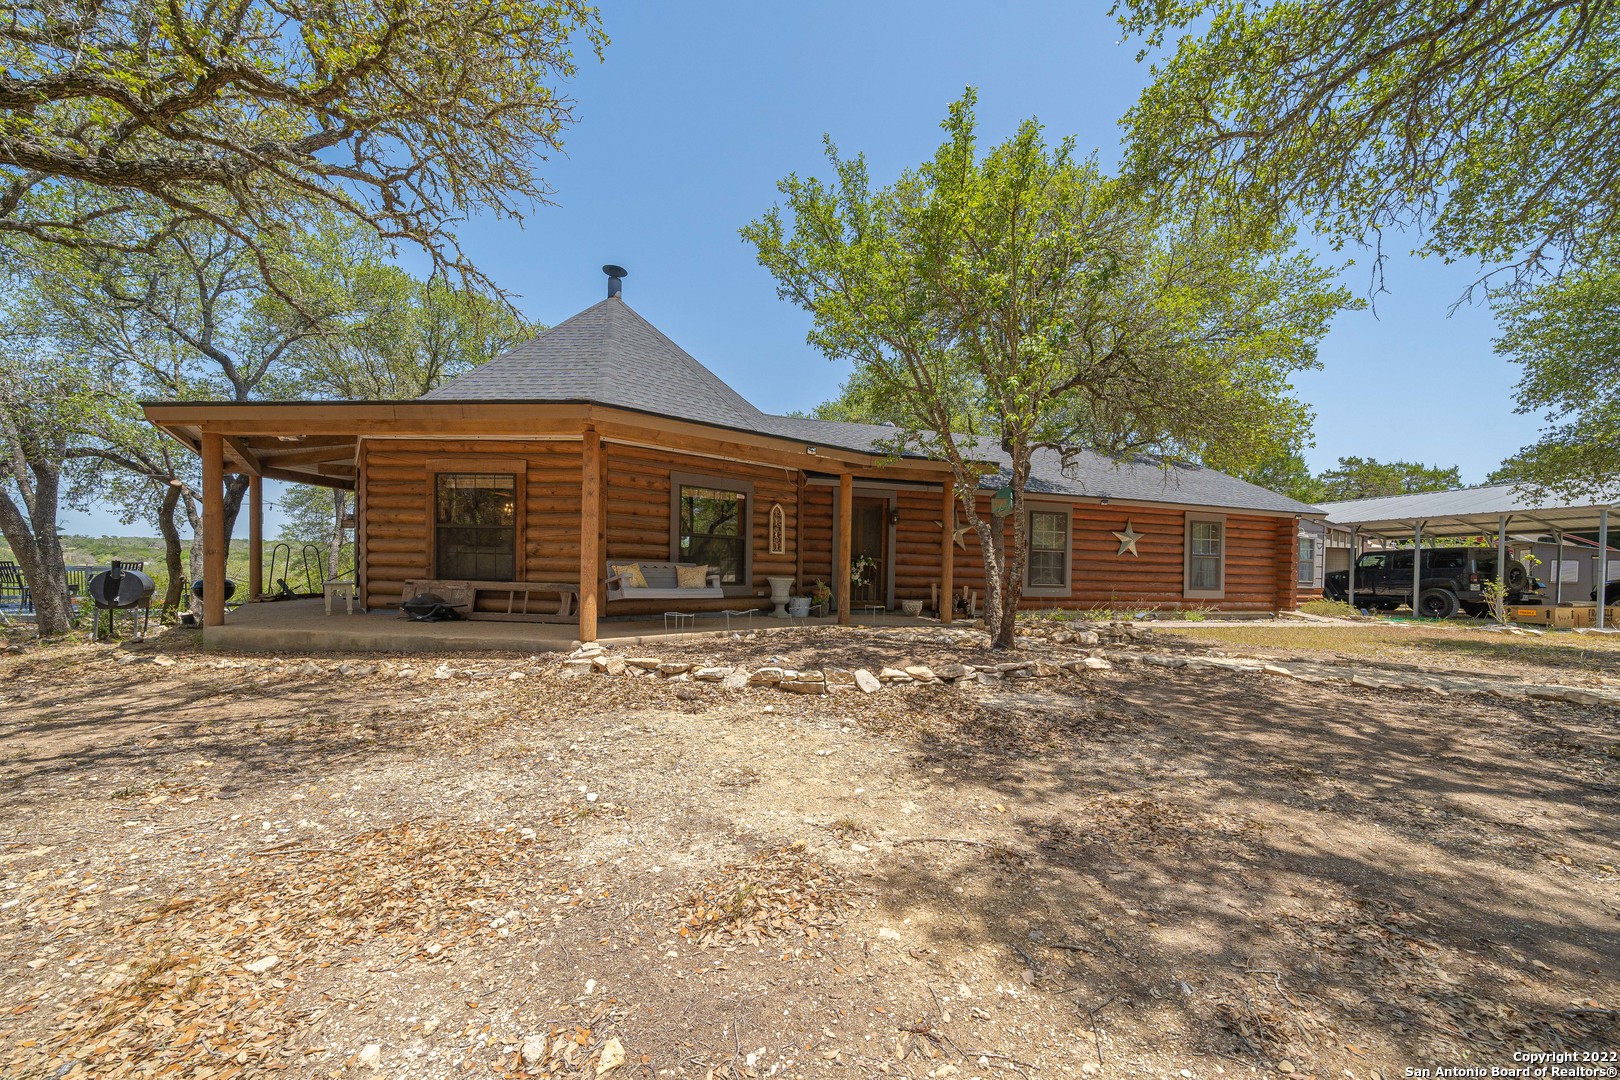 Very unique and cozy log cabin on fenced 6.96 acres.  Amazing Hill Country views.  Open floor plan in the octagonal living/dining/kitchen area.  Rock fireplace in the living room and a beautiful Heartland Sweet Heart Stove, wood burning, in the center of the kitchen.  Kitchen counters were updated with quartz countertops. Main bathroom updated with frameless glass shower and a granite top corner cabinet, flooring was updated with tile.  Master bath features a wooden soaking tub. Huge master suite that leads to an office/study/sunroom.  Spiral staircase leads to a spacious loft area.  HVAC system features whole house oxidation system to neutralize air.  A breezeway leads to a 2 car garage with a half bath.  Additional 2 car covered carport.  Workshop, storage shed.  2400 gallon water tank and a deep well.  Lots of fruit trees.  Electric gate at the entrance.  The log cabin is custom build with 9" logs.  All screws, no nails.  Roof recently replaced in early 2021.  Hill Country living at its best yet close to Boerne, San Antonio and all shopping conveniences.  A MUST SEE!